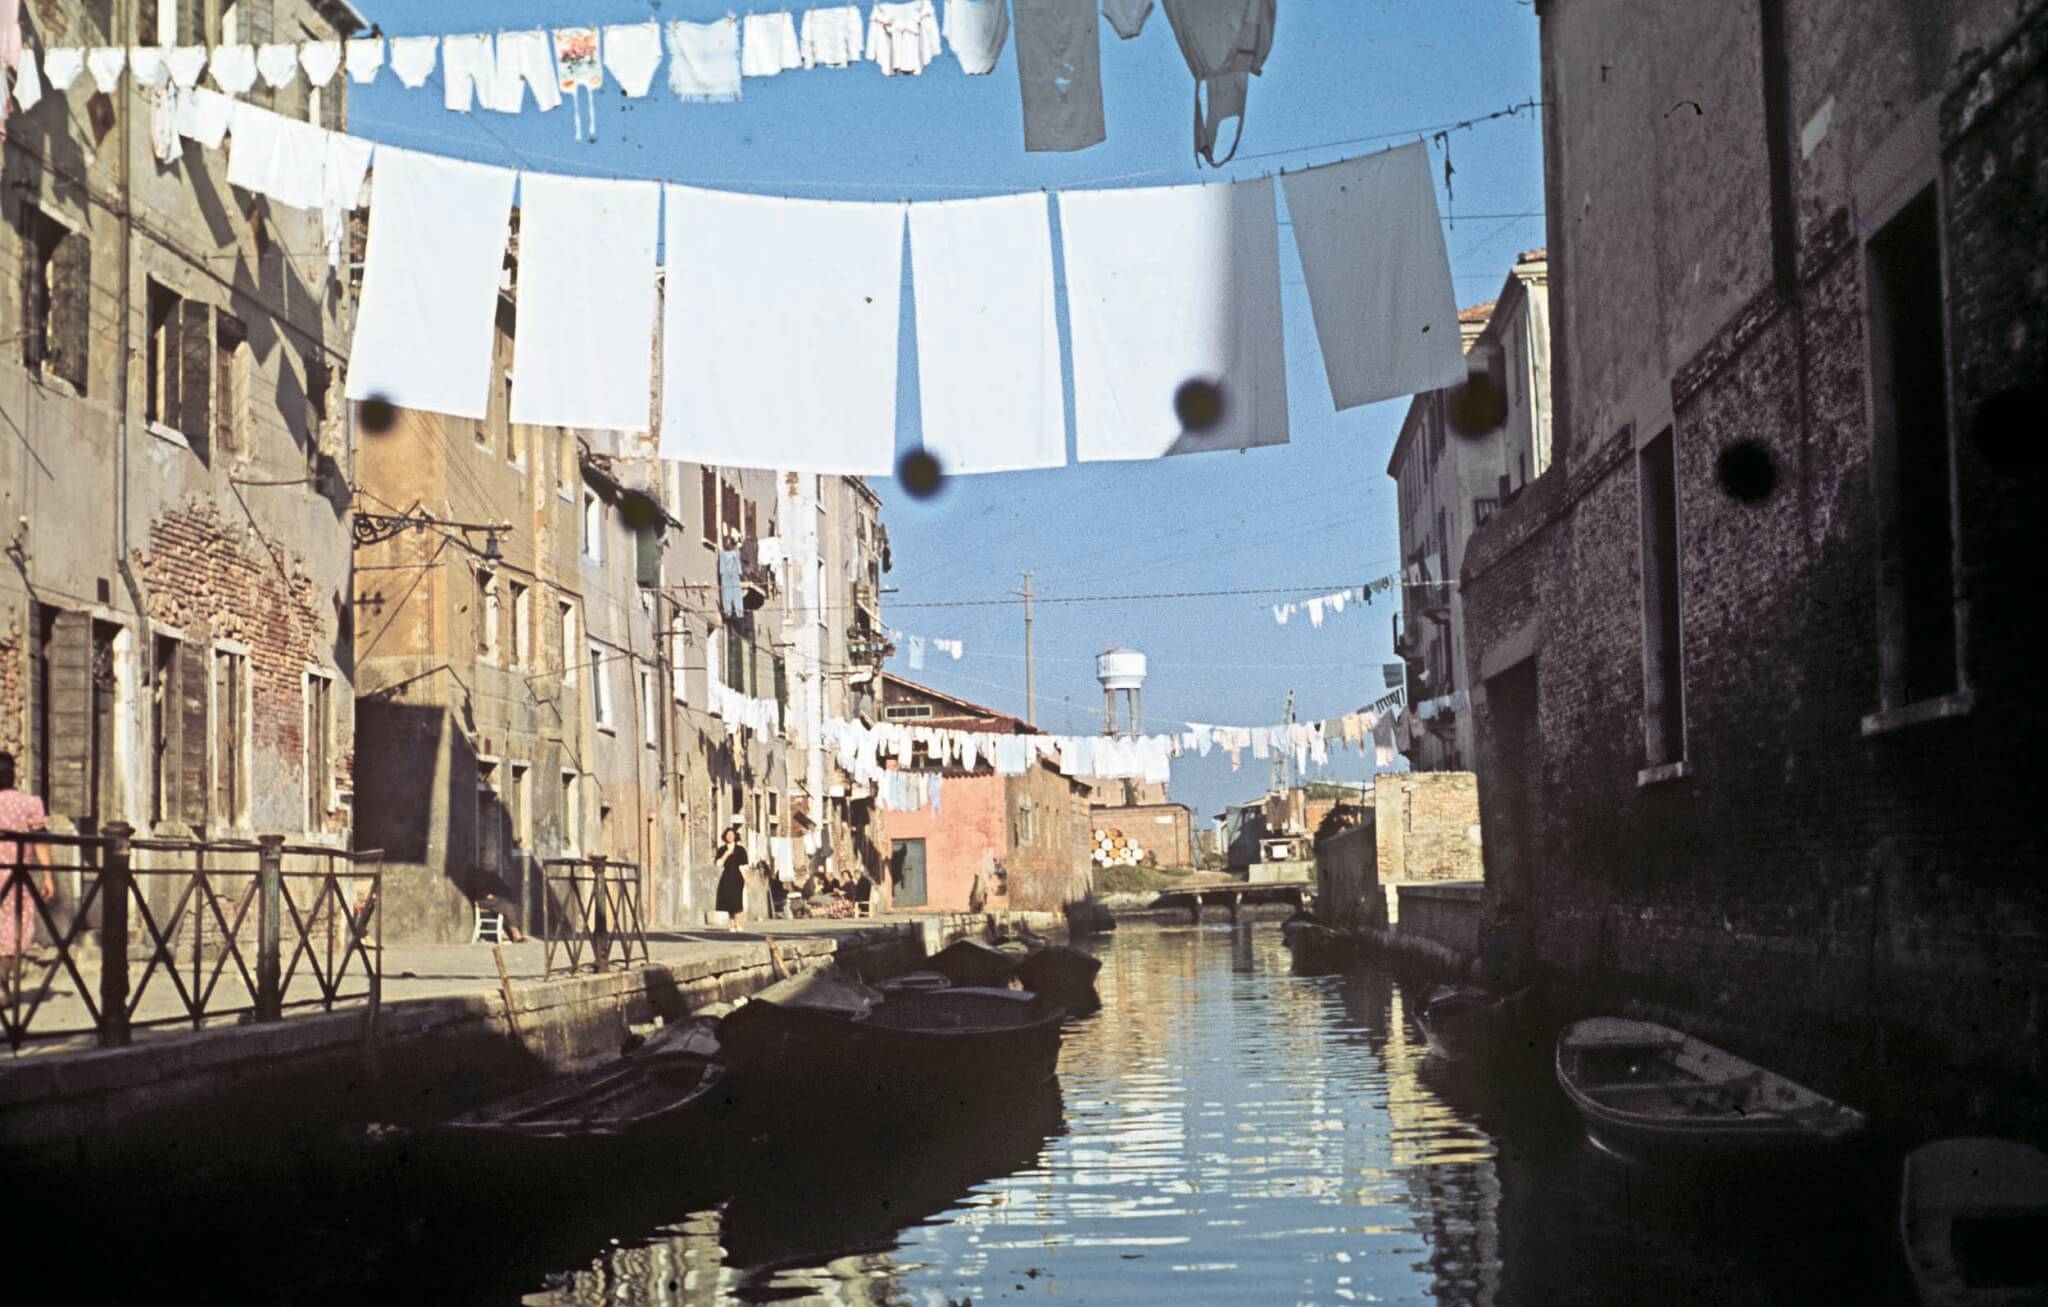 Photograph of Venice, Italy by Denise Scott Brown